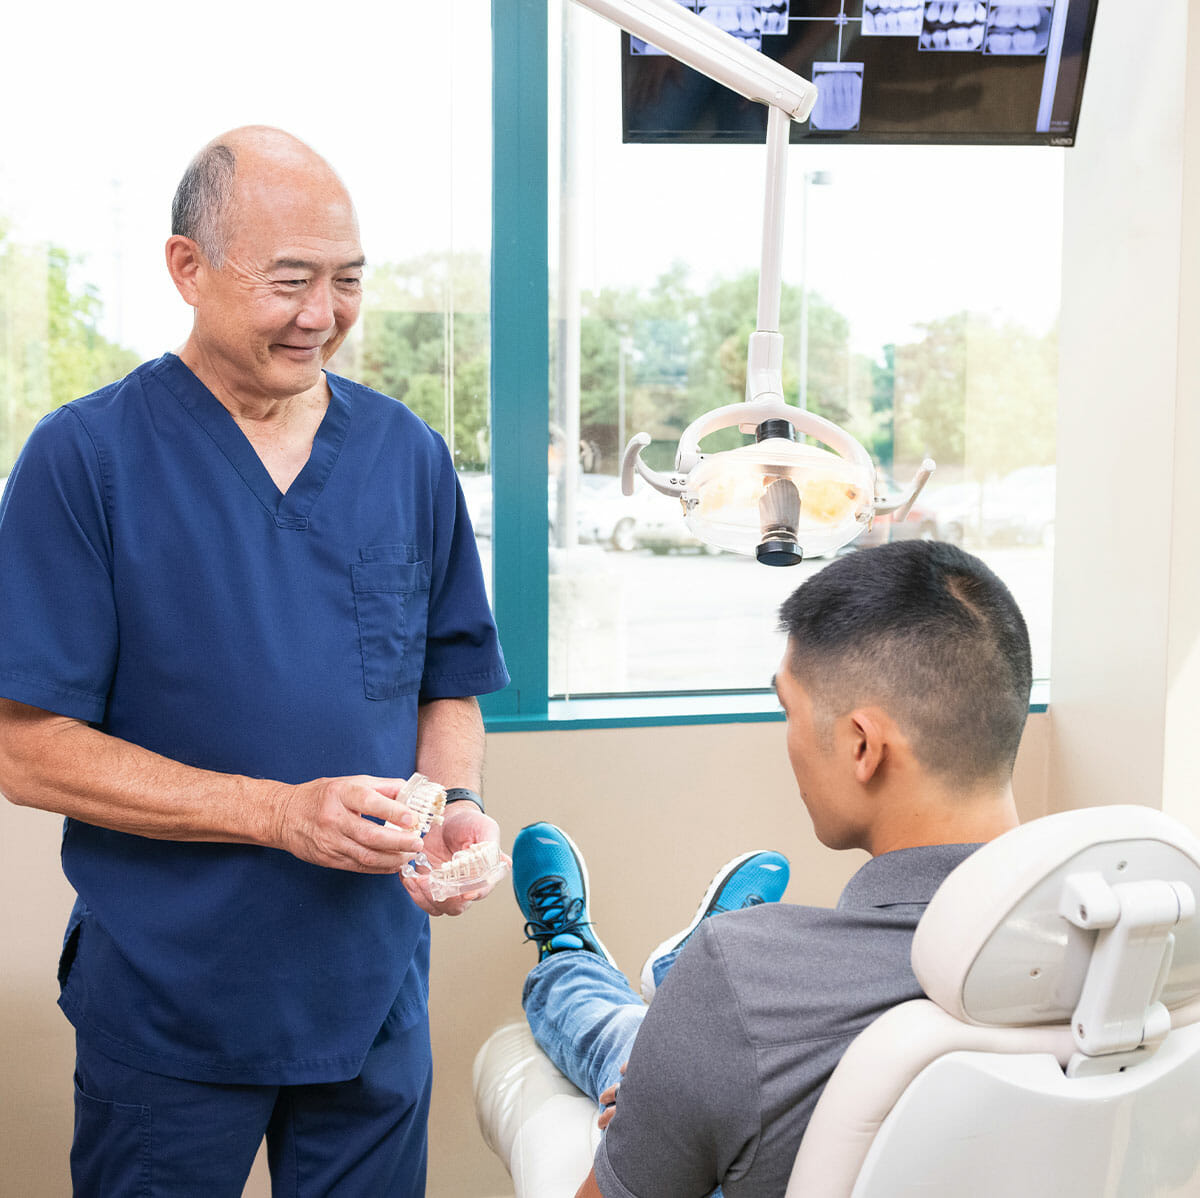 Dr. Sato showing patient a model of teeth